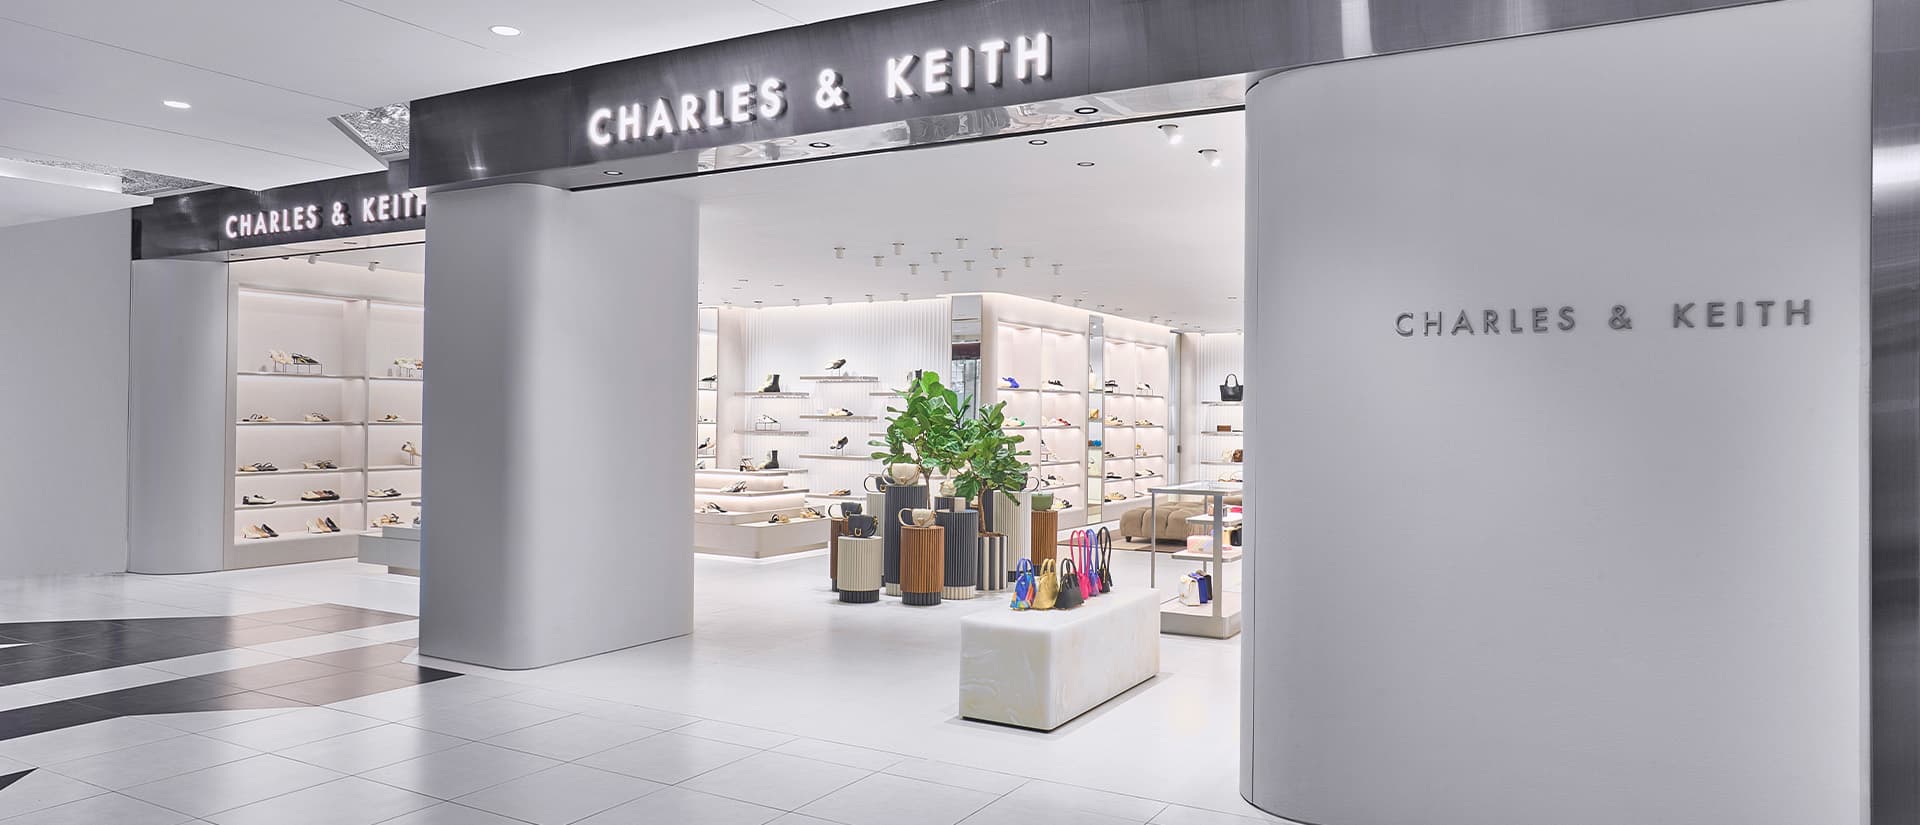 Image of CHARLES & KEITH’s storefront at Tampines Mall, Singapore - CHARLES & KEITH